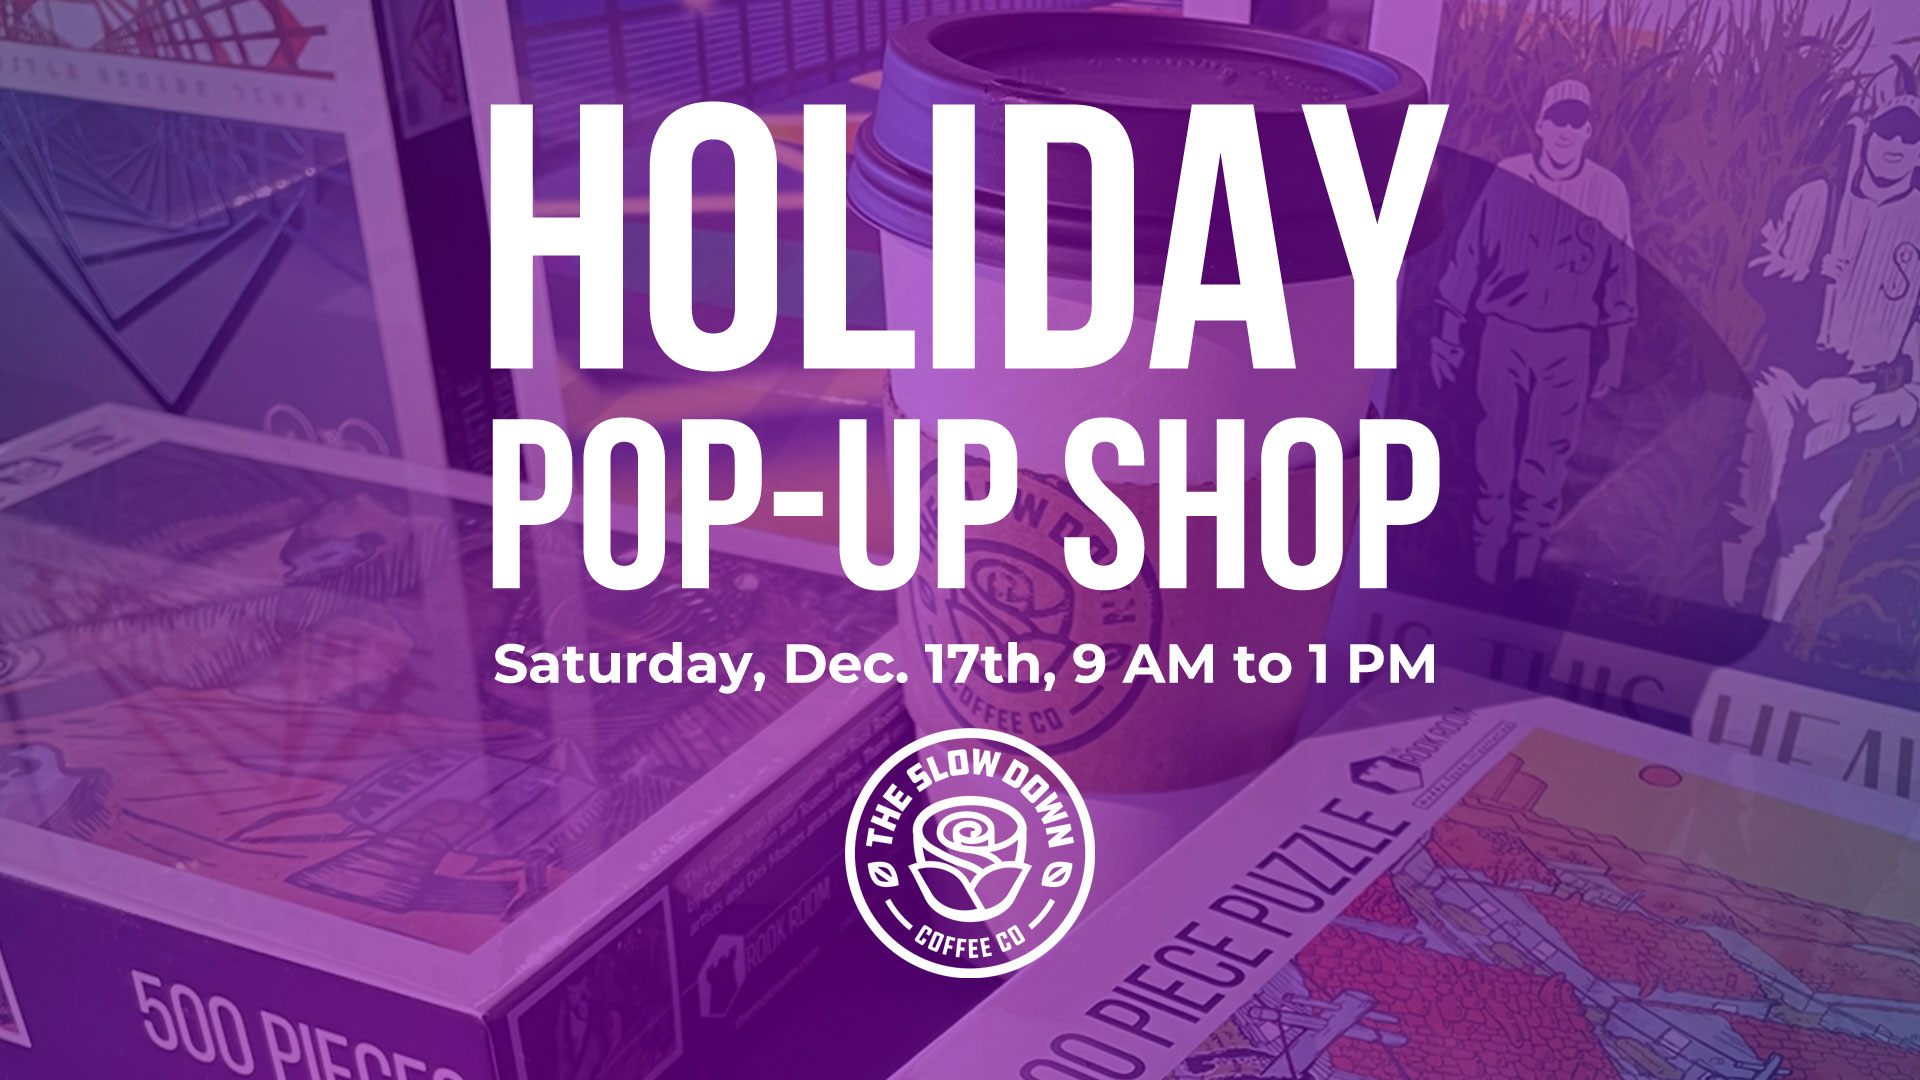 Holiday Jigsaw Puzzle Pop-Up Shop at The Slow Down December 17, 2022